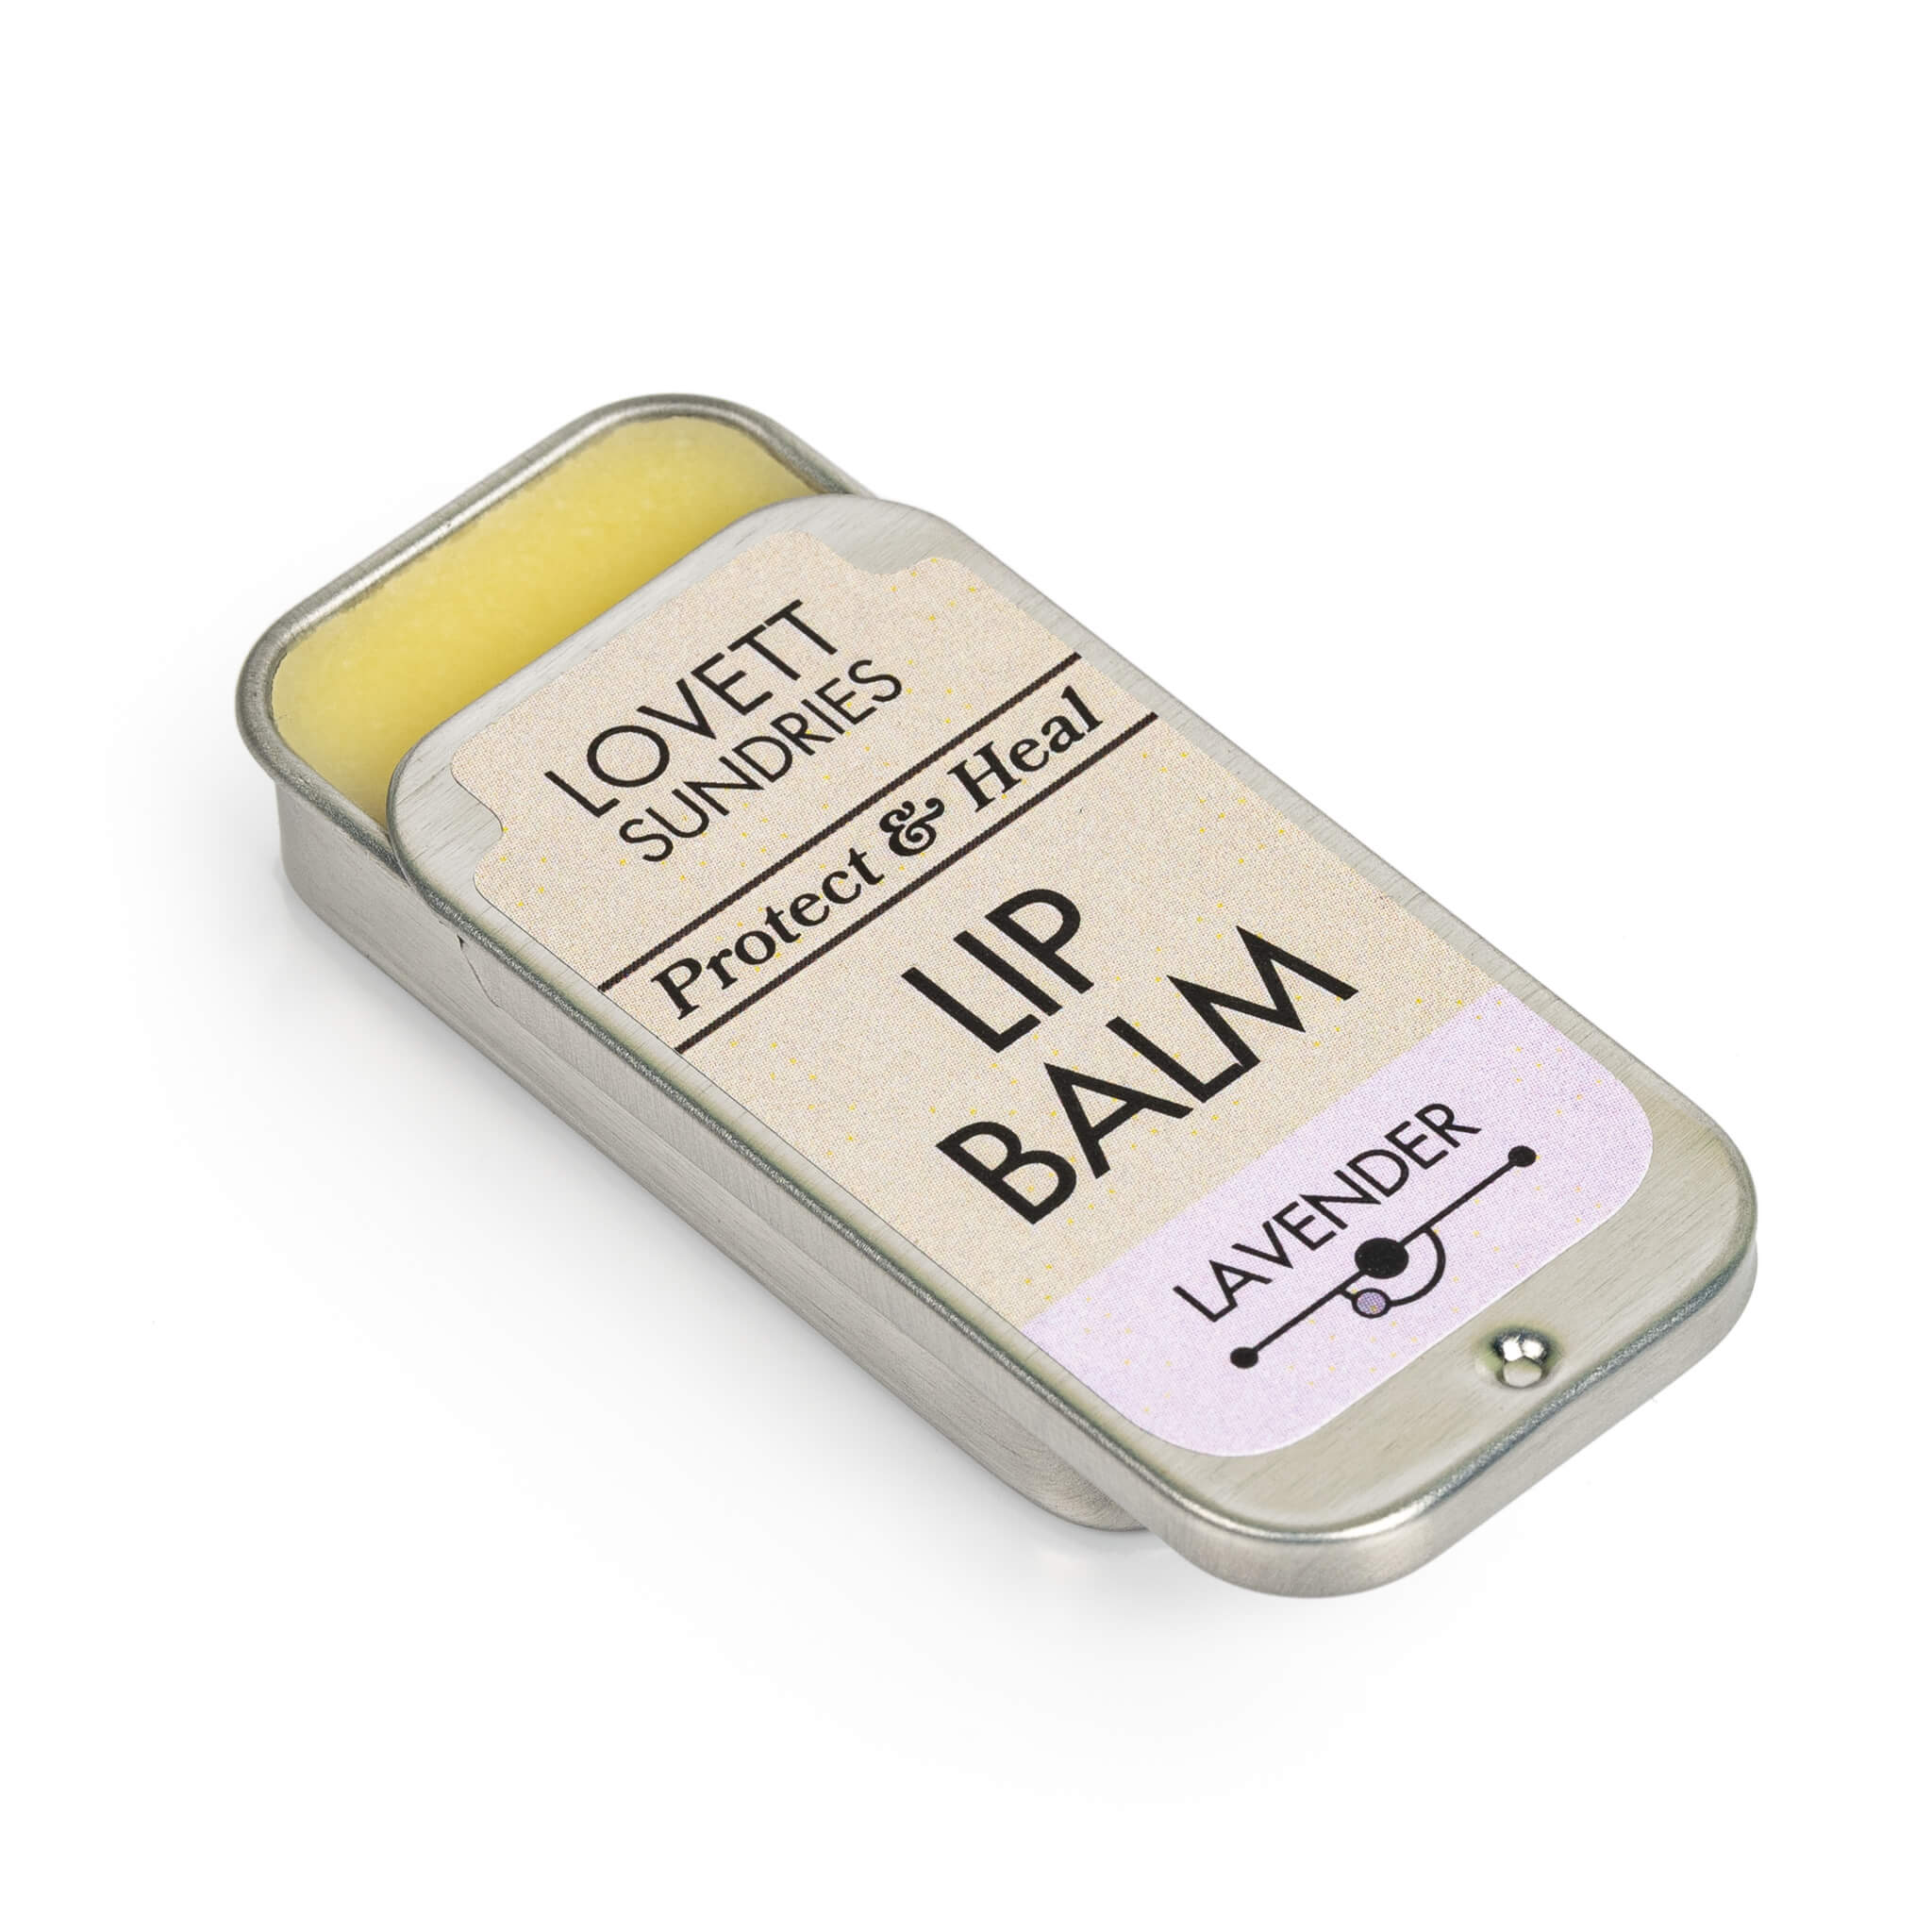 All natural lavender scented lip balm in a recyclable tin. 